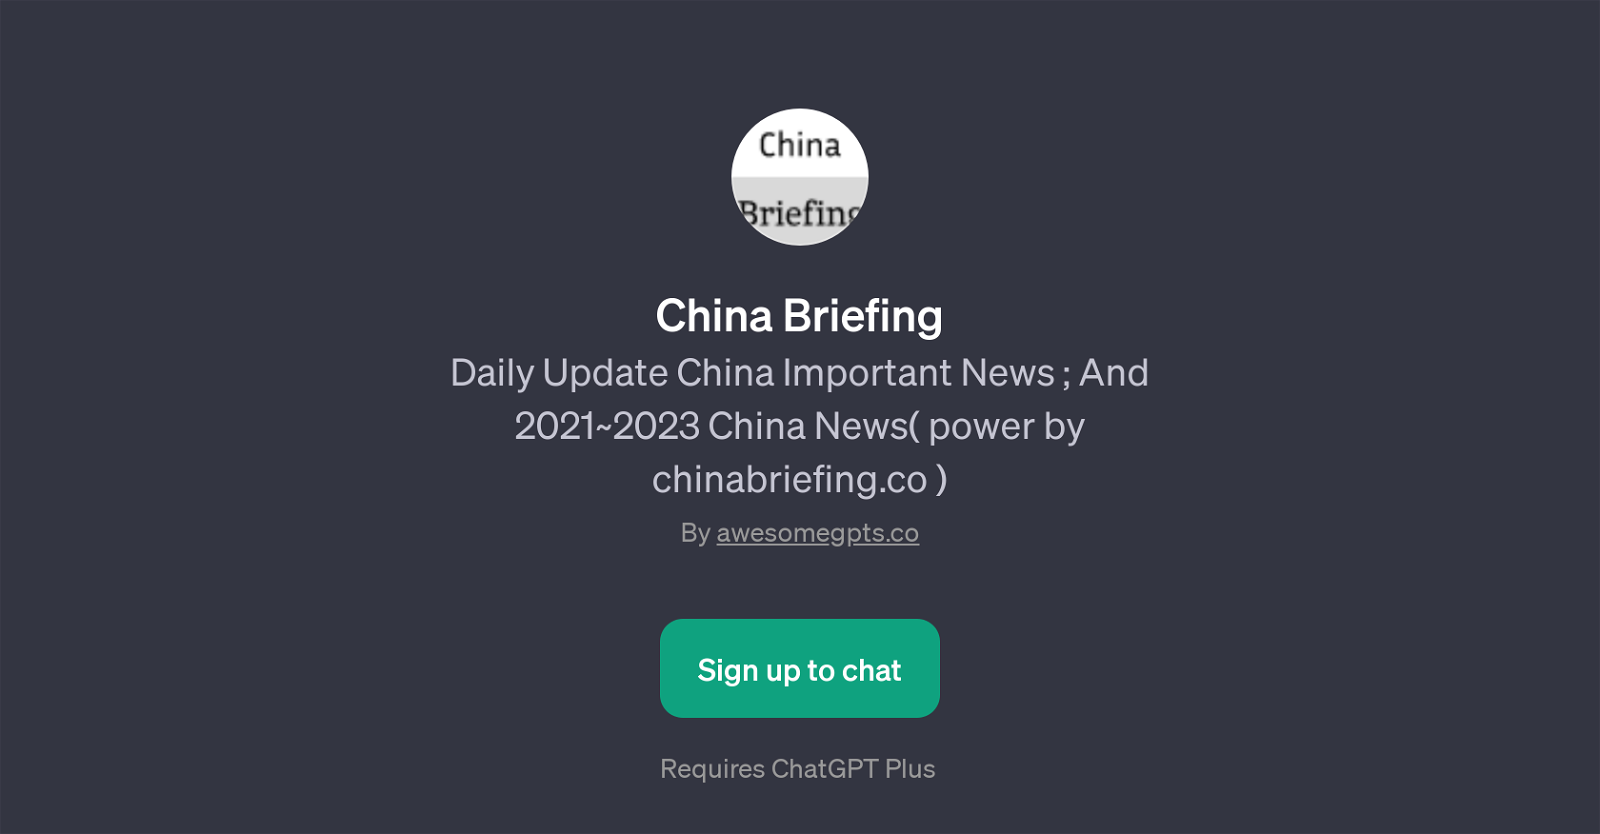 China Briefing website